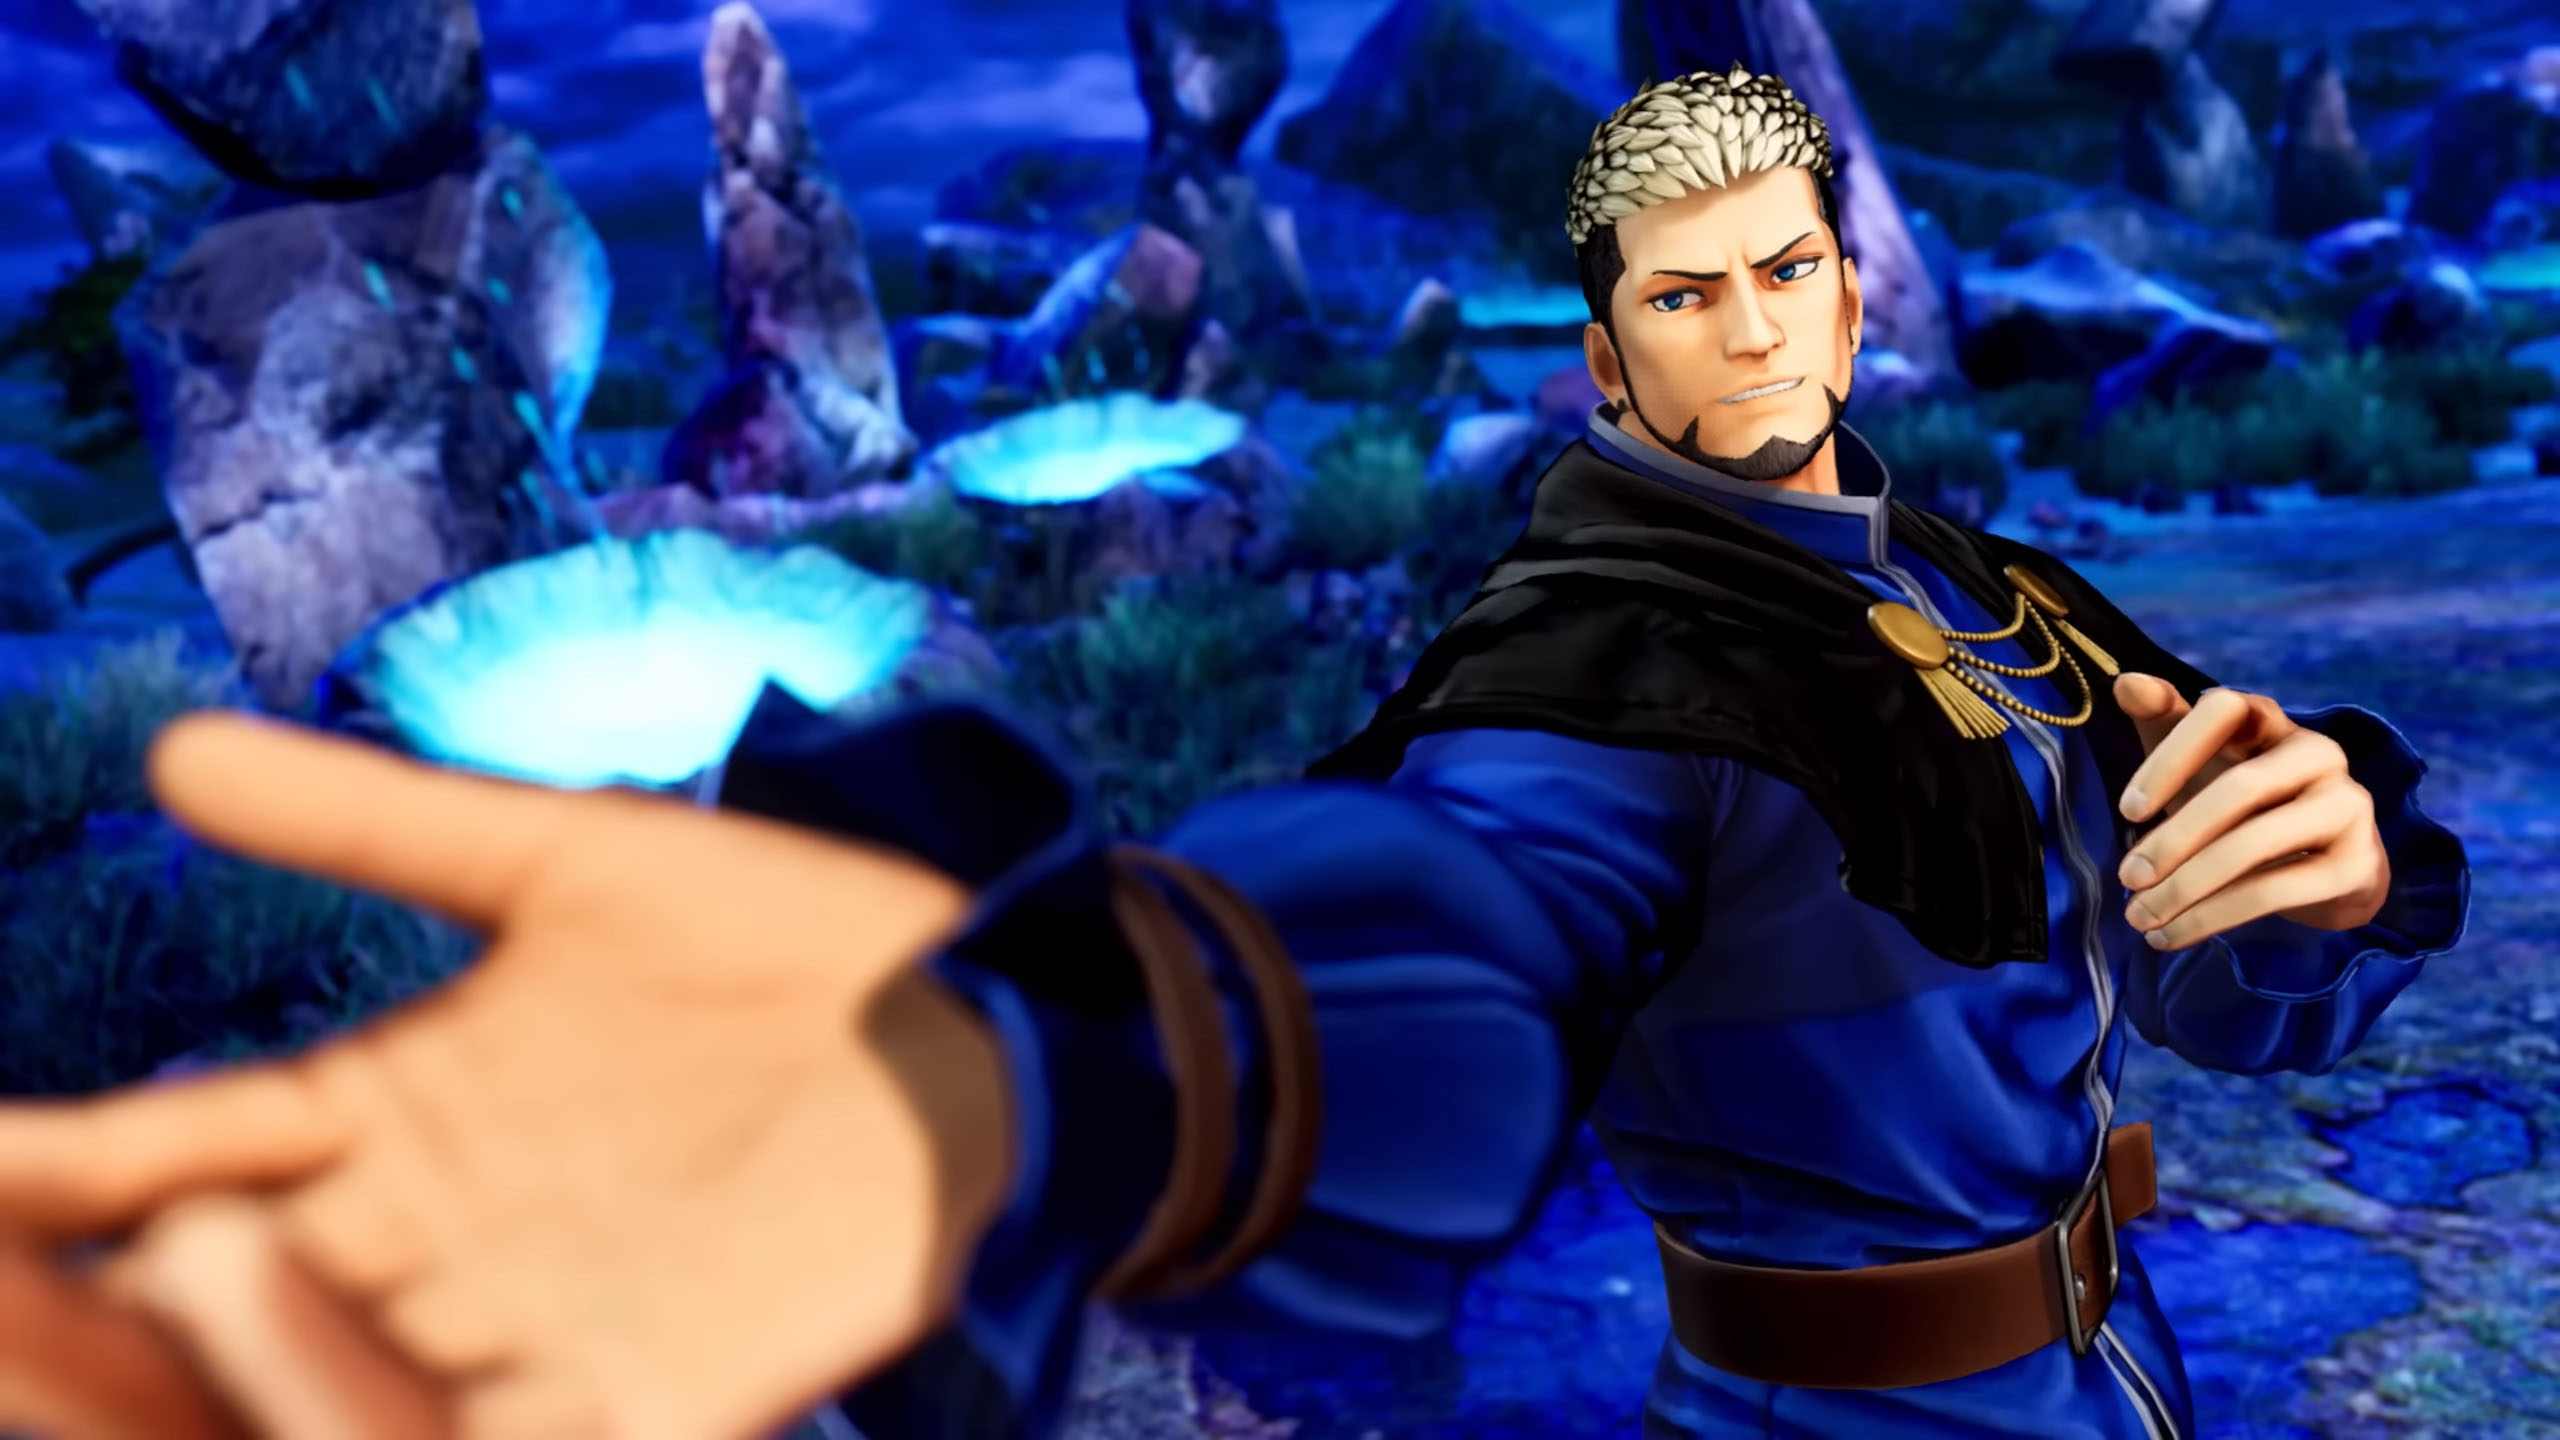 The King of Fighters XV DLC character Kim launches in April, DLC character Goenitz announced